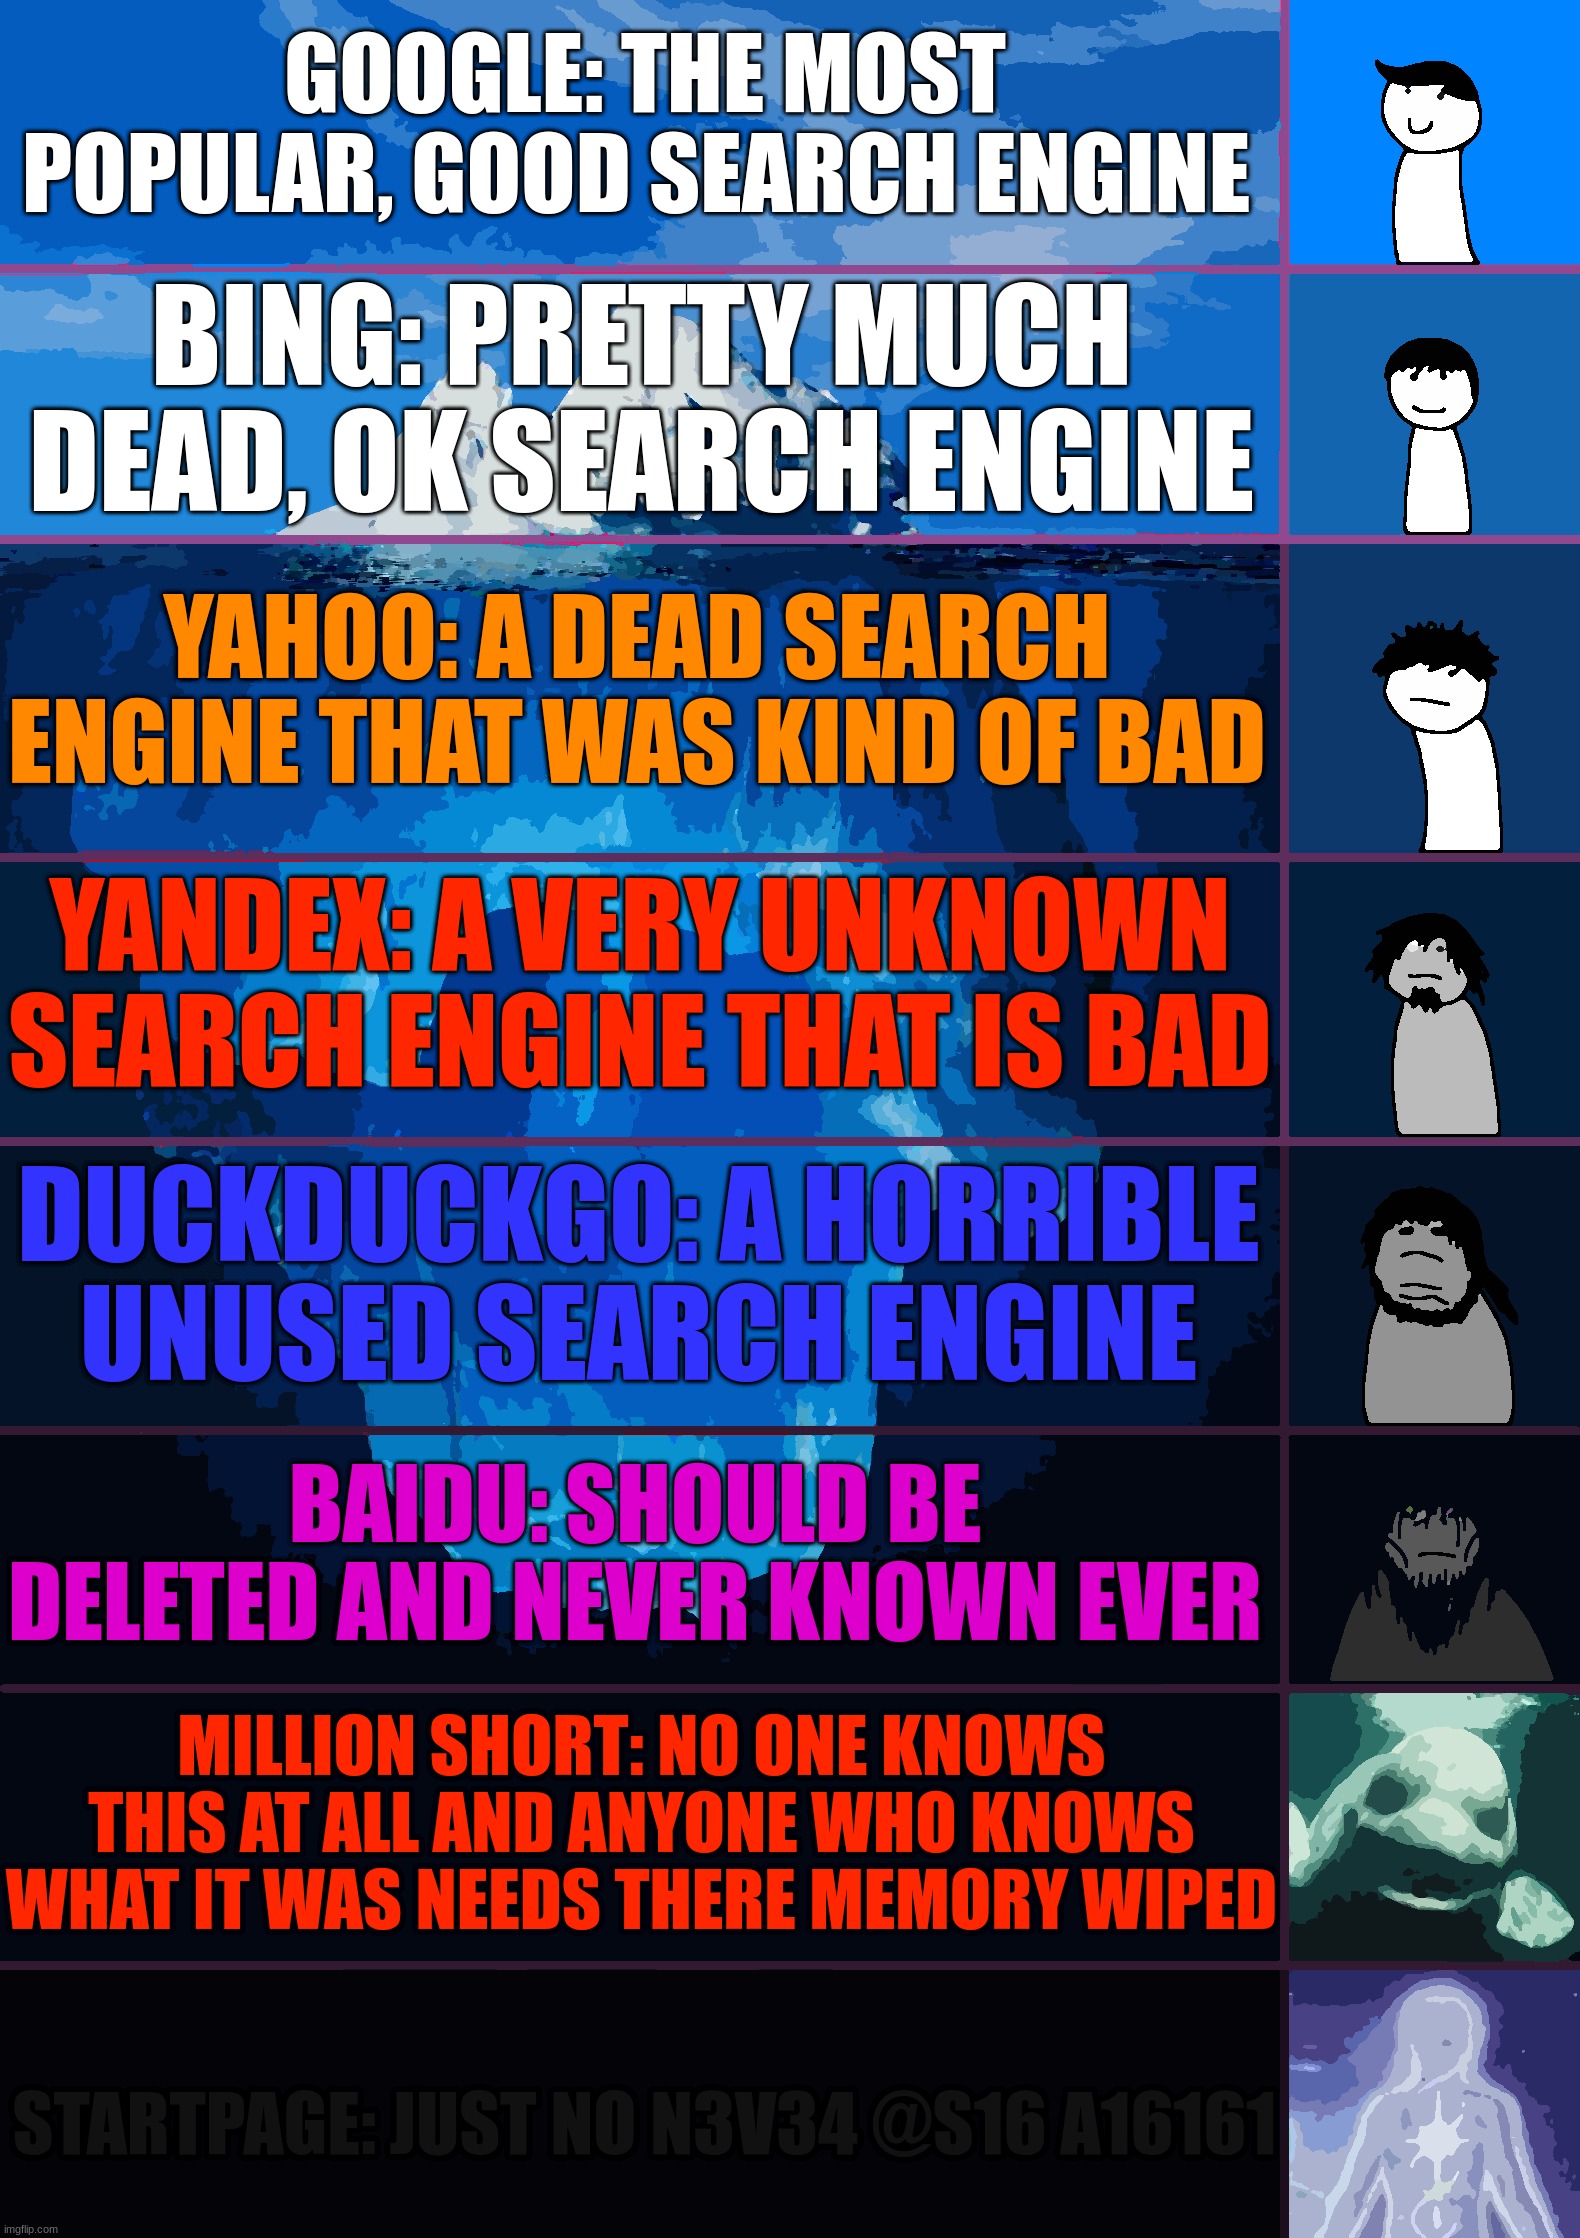 Search engine iceberg | GOOGLE: THE MOST POPULAR, GOOD SEARCH ENGINE; BING: PRETTY MUCH DEAD, OK SEARCH ENGINE; YAHOO: A DEAD SEARCH ENGINE THAT WAS KIND OF BAD; YANDEX: A VERY UNKNOWN SEARCH ENGINE THAT IS BAD; DUCKDUCKGO: A HORRIBLE UNUSED SEARCH ENGINE; BAIDU: SHOULD BE DELETED AND NEVER KNOWN EVER; MILLION SHORT: NO ONE KNOWS THIS AT ALL AND ANYONE WHO KNOWS WHAT IT WAS NEEDS THERE MEMORY WIPED; STARTPAGE: JUST NO N3V34 @S16 A16161 | image tagged in iceberg levels tiers | made w/ Imgflip meme maker